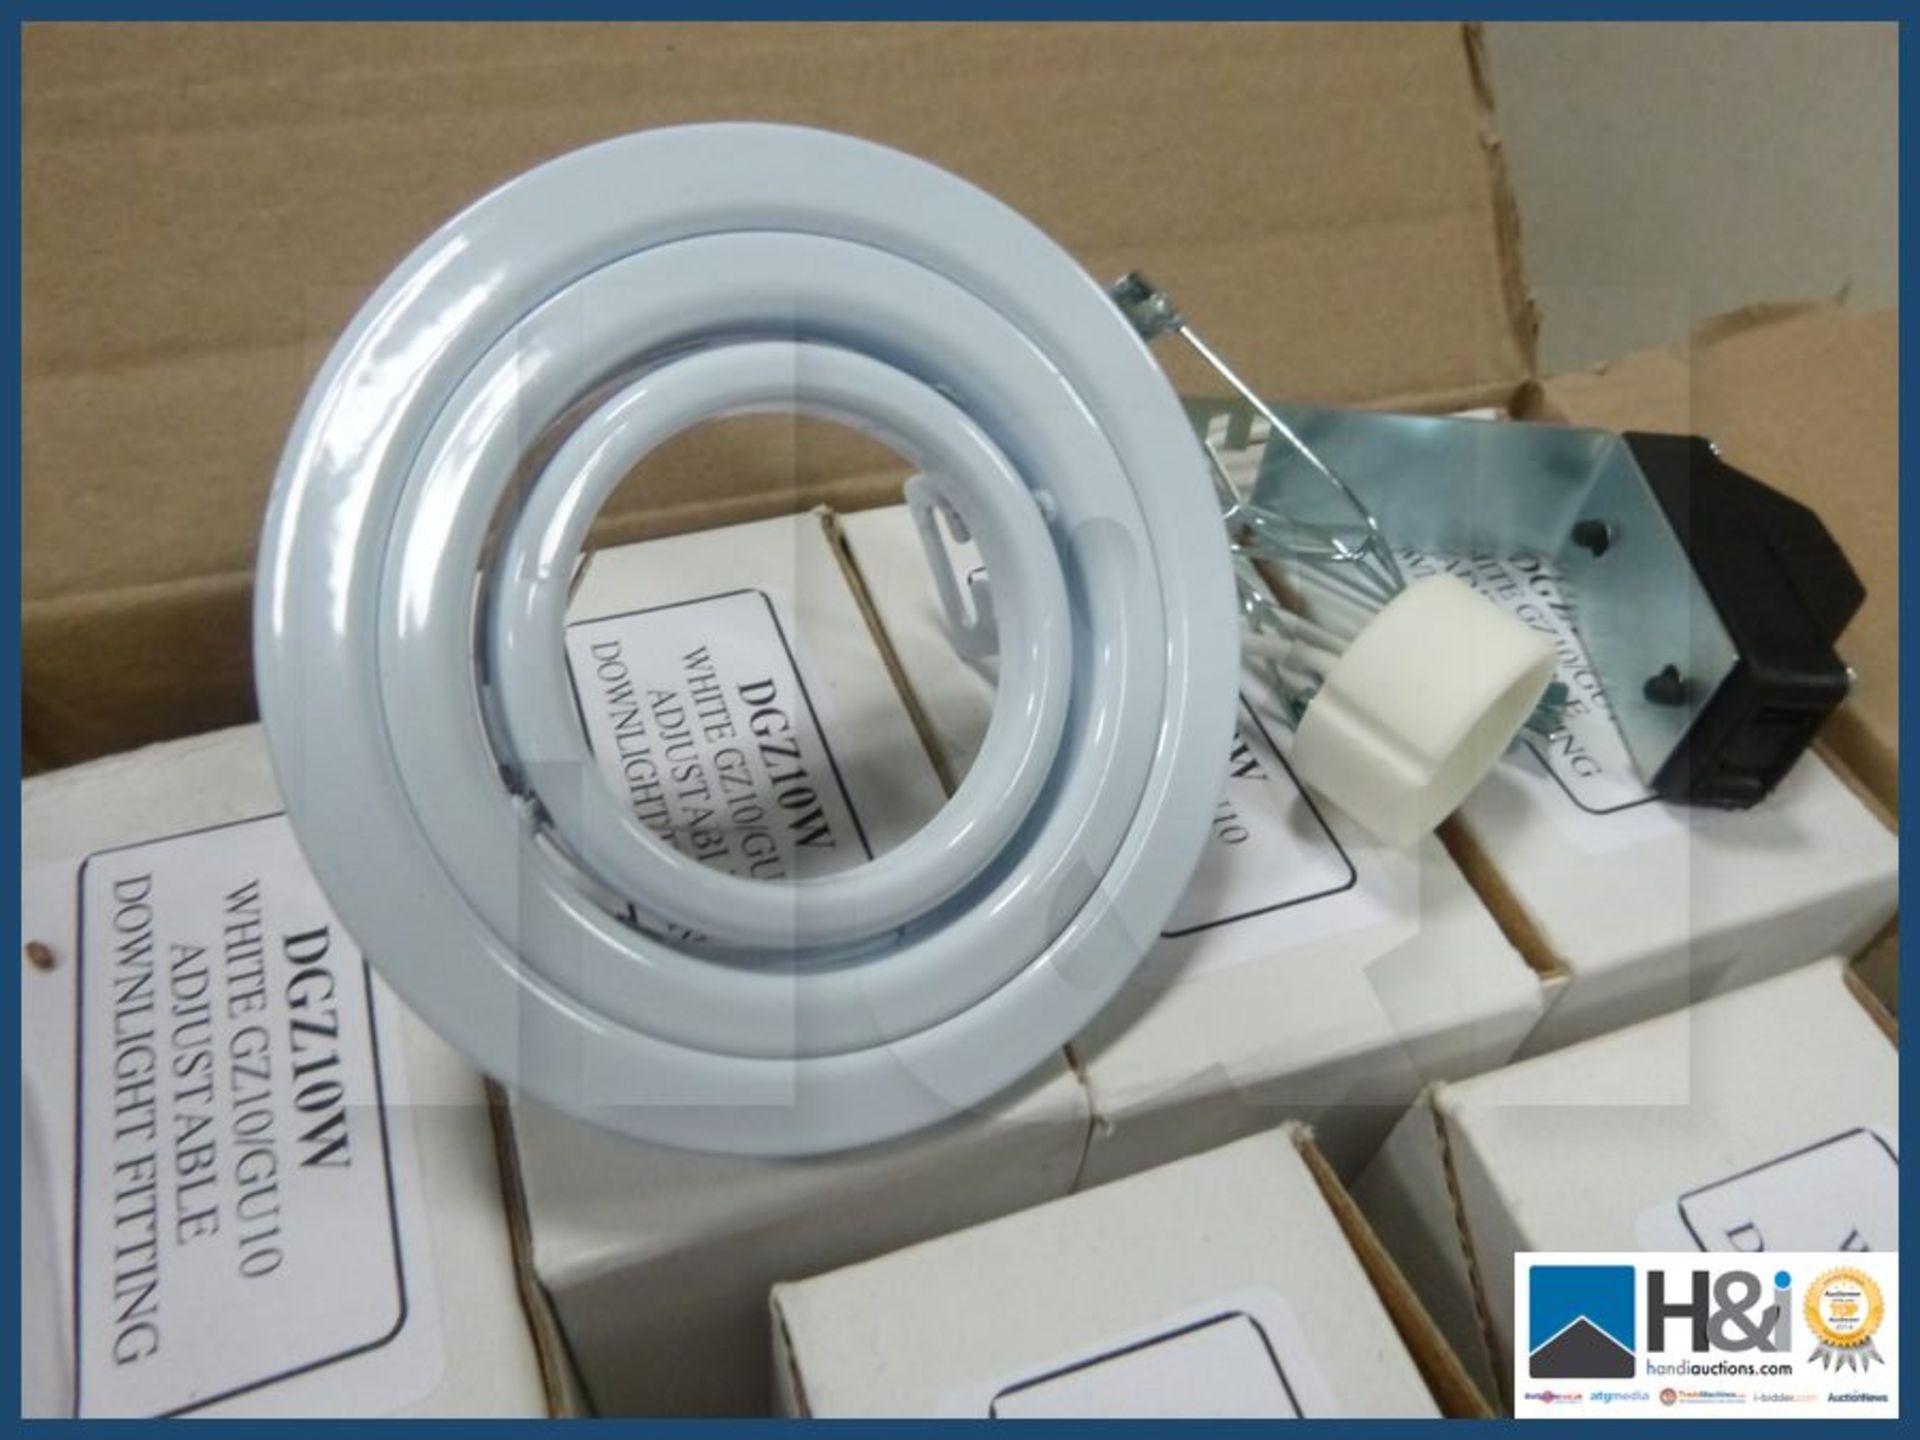 While adjustable downlight fitting GU10 fitting X 10 pcs. NO VAT on item except on buyers premium. S - Image 2 of 3